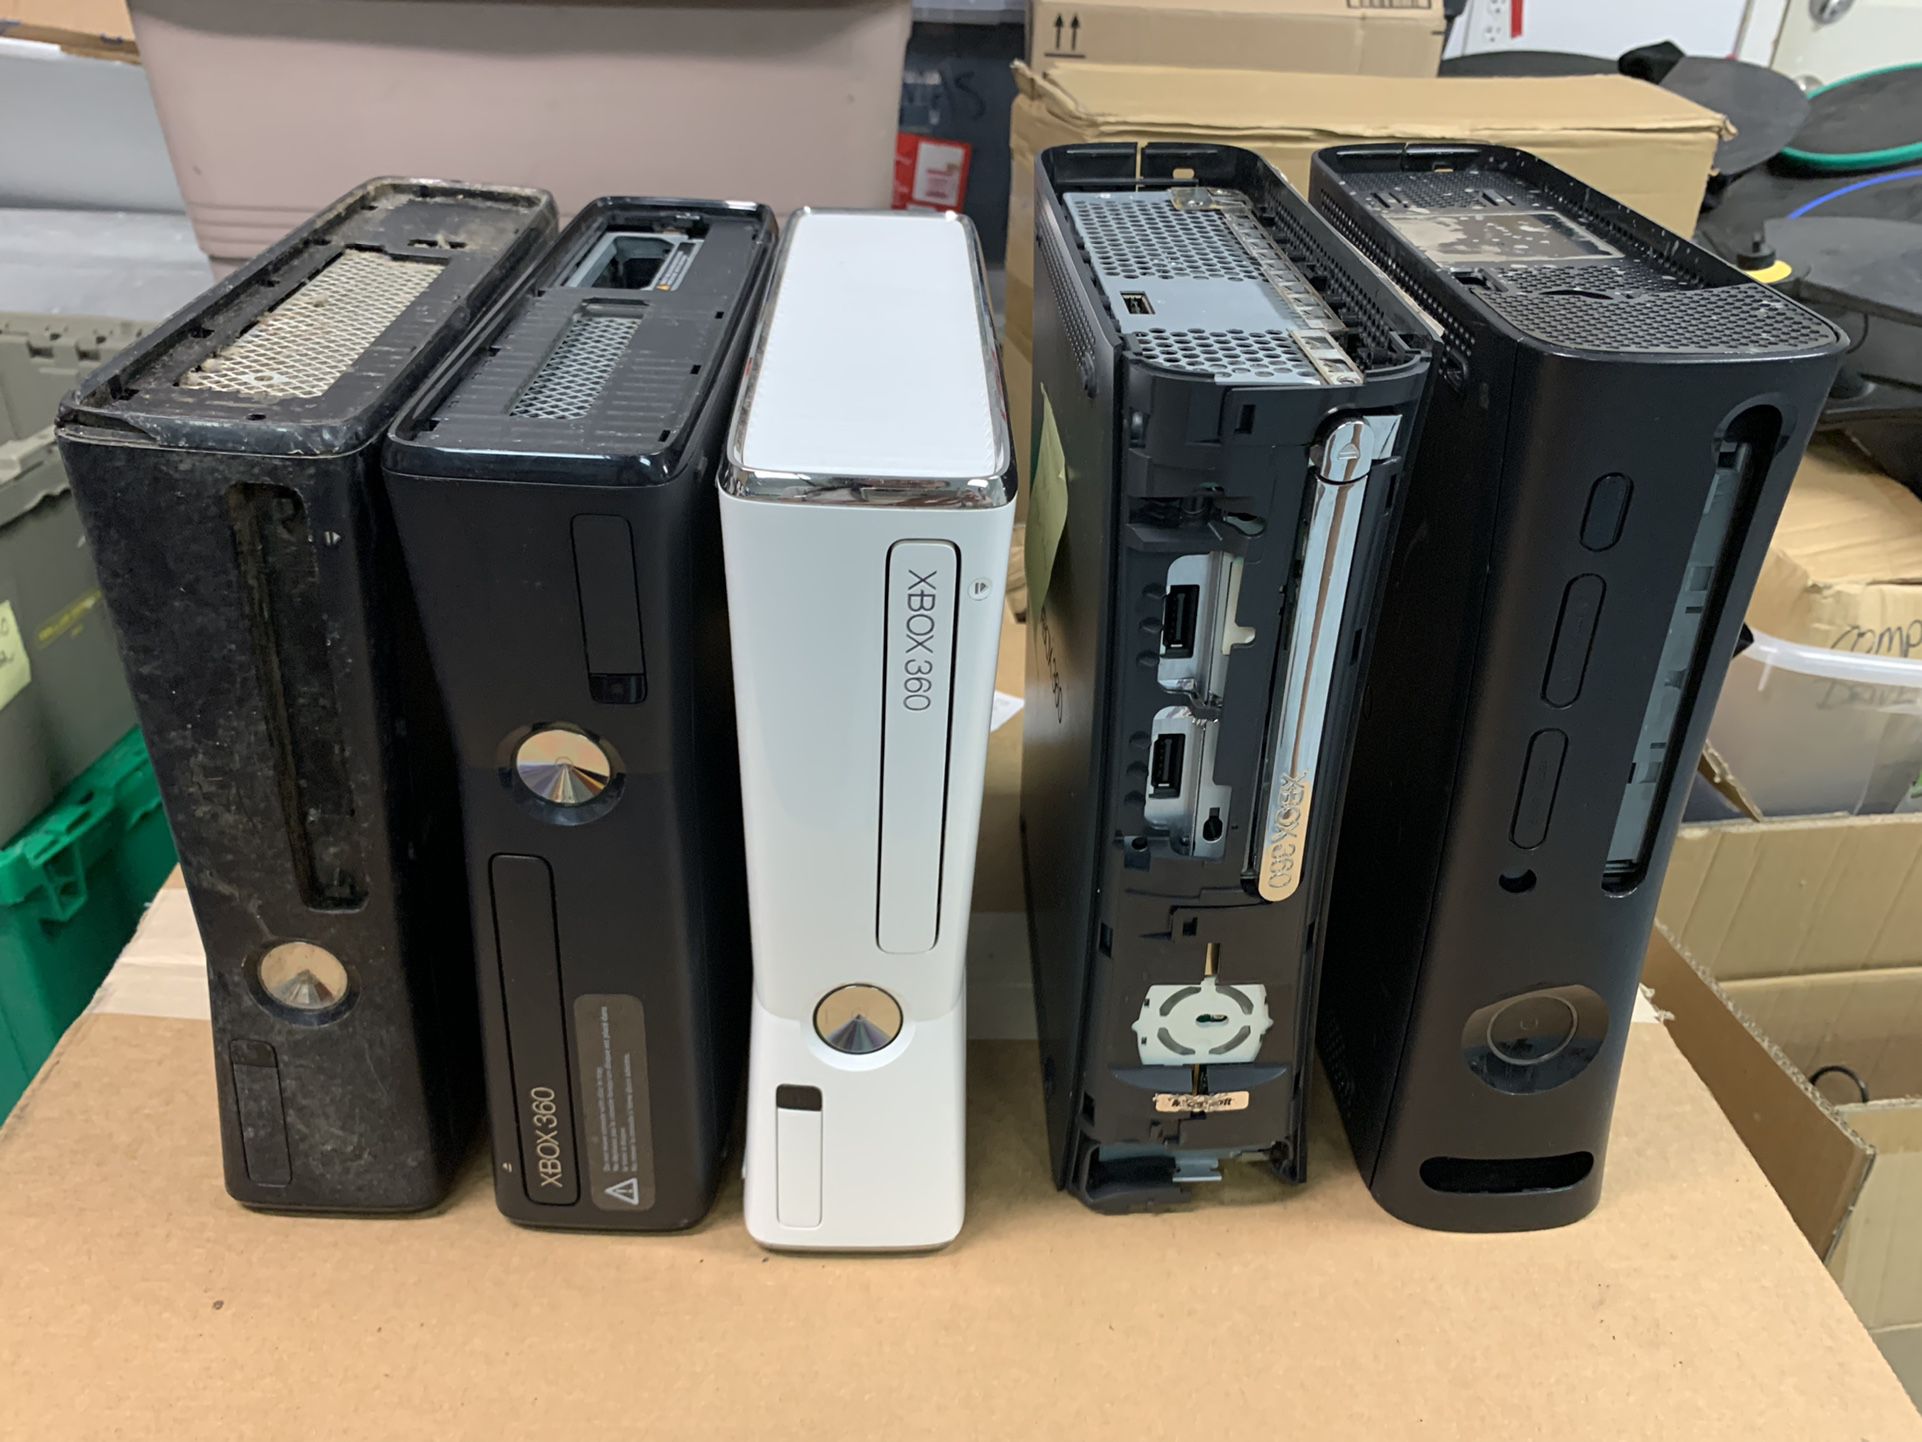 Lot of 5 Microsoft Xbox 360 Consoles for Parts or Repair As-Is.  